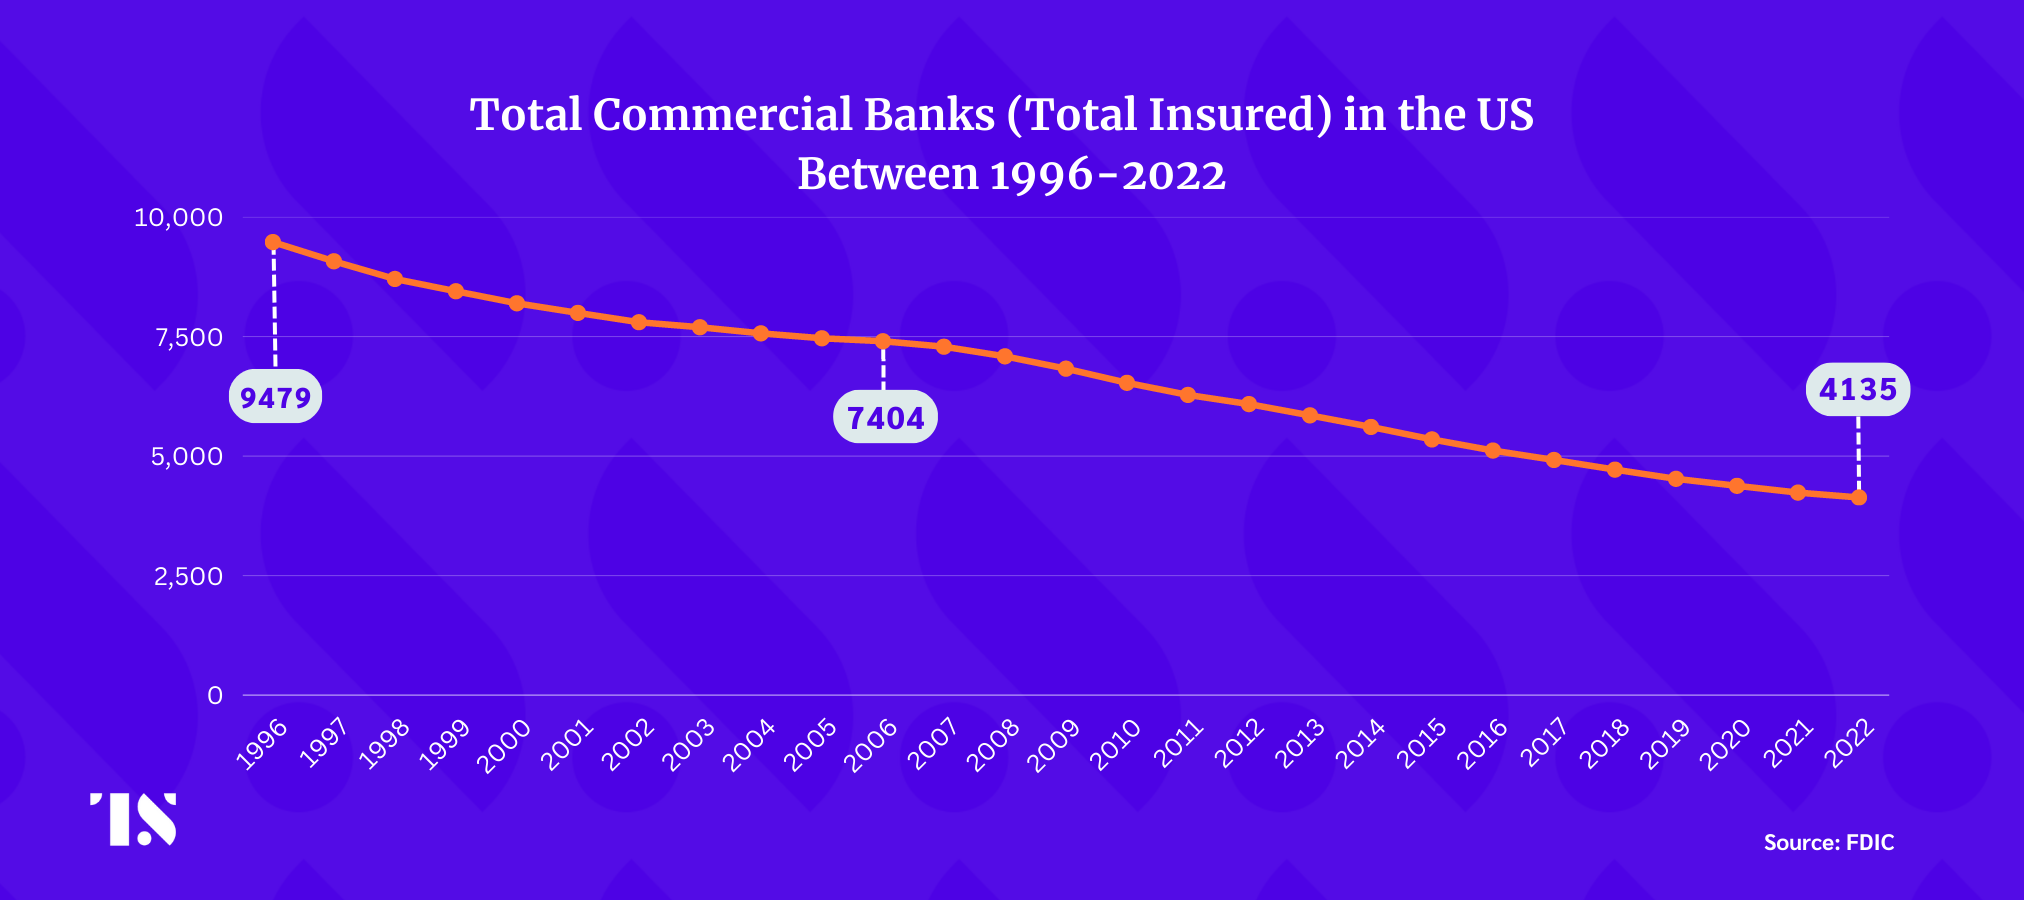 Trend line showing the total number of banks in the America between 1996-2002. The numbers have been steadily decline from 9,479 in 1996 to 4,135 in 2022. 